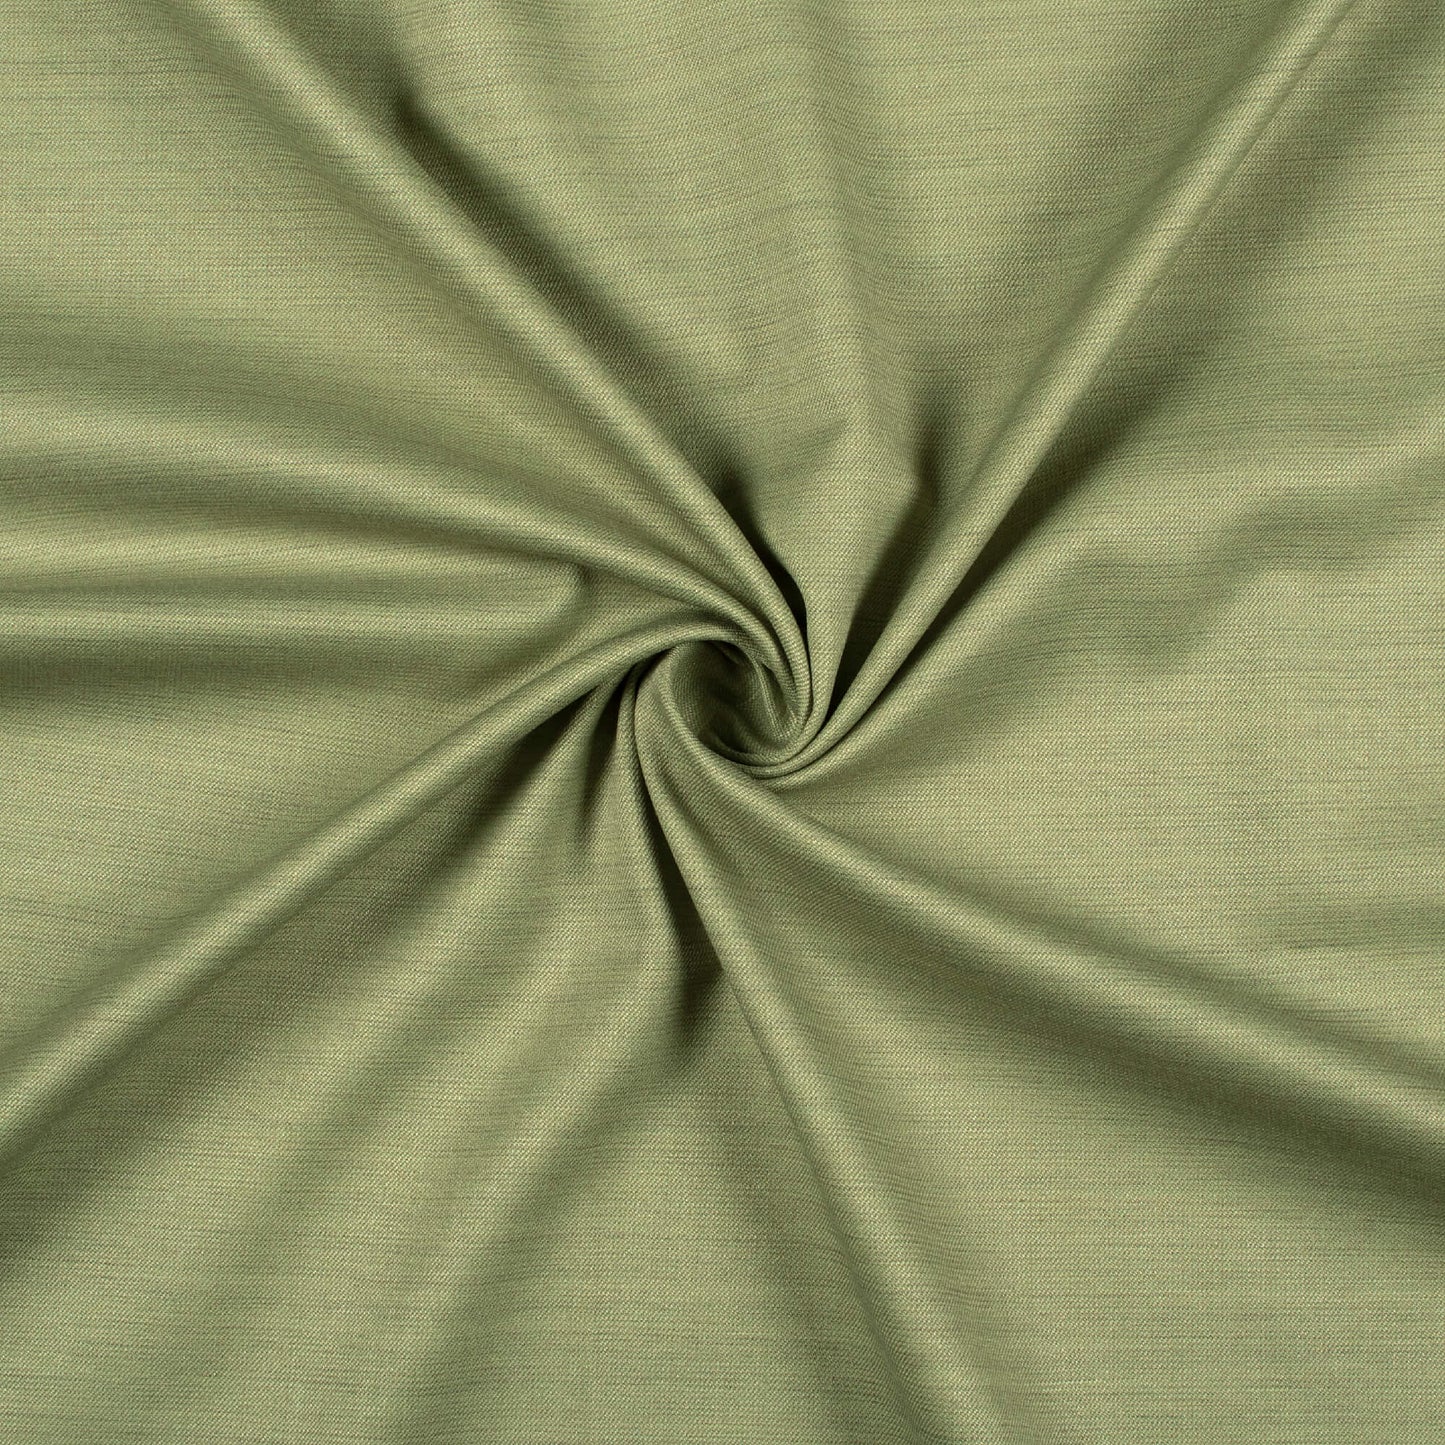 Pistachio Green Texture Printed Luxury Suiting Fabric